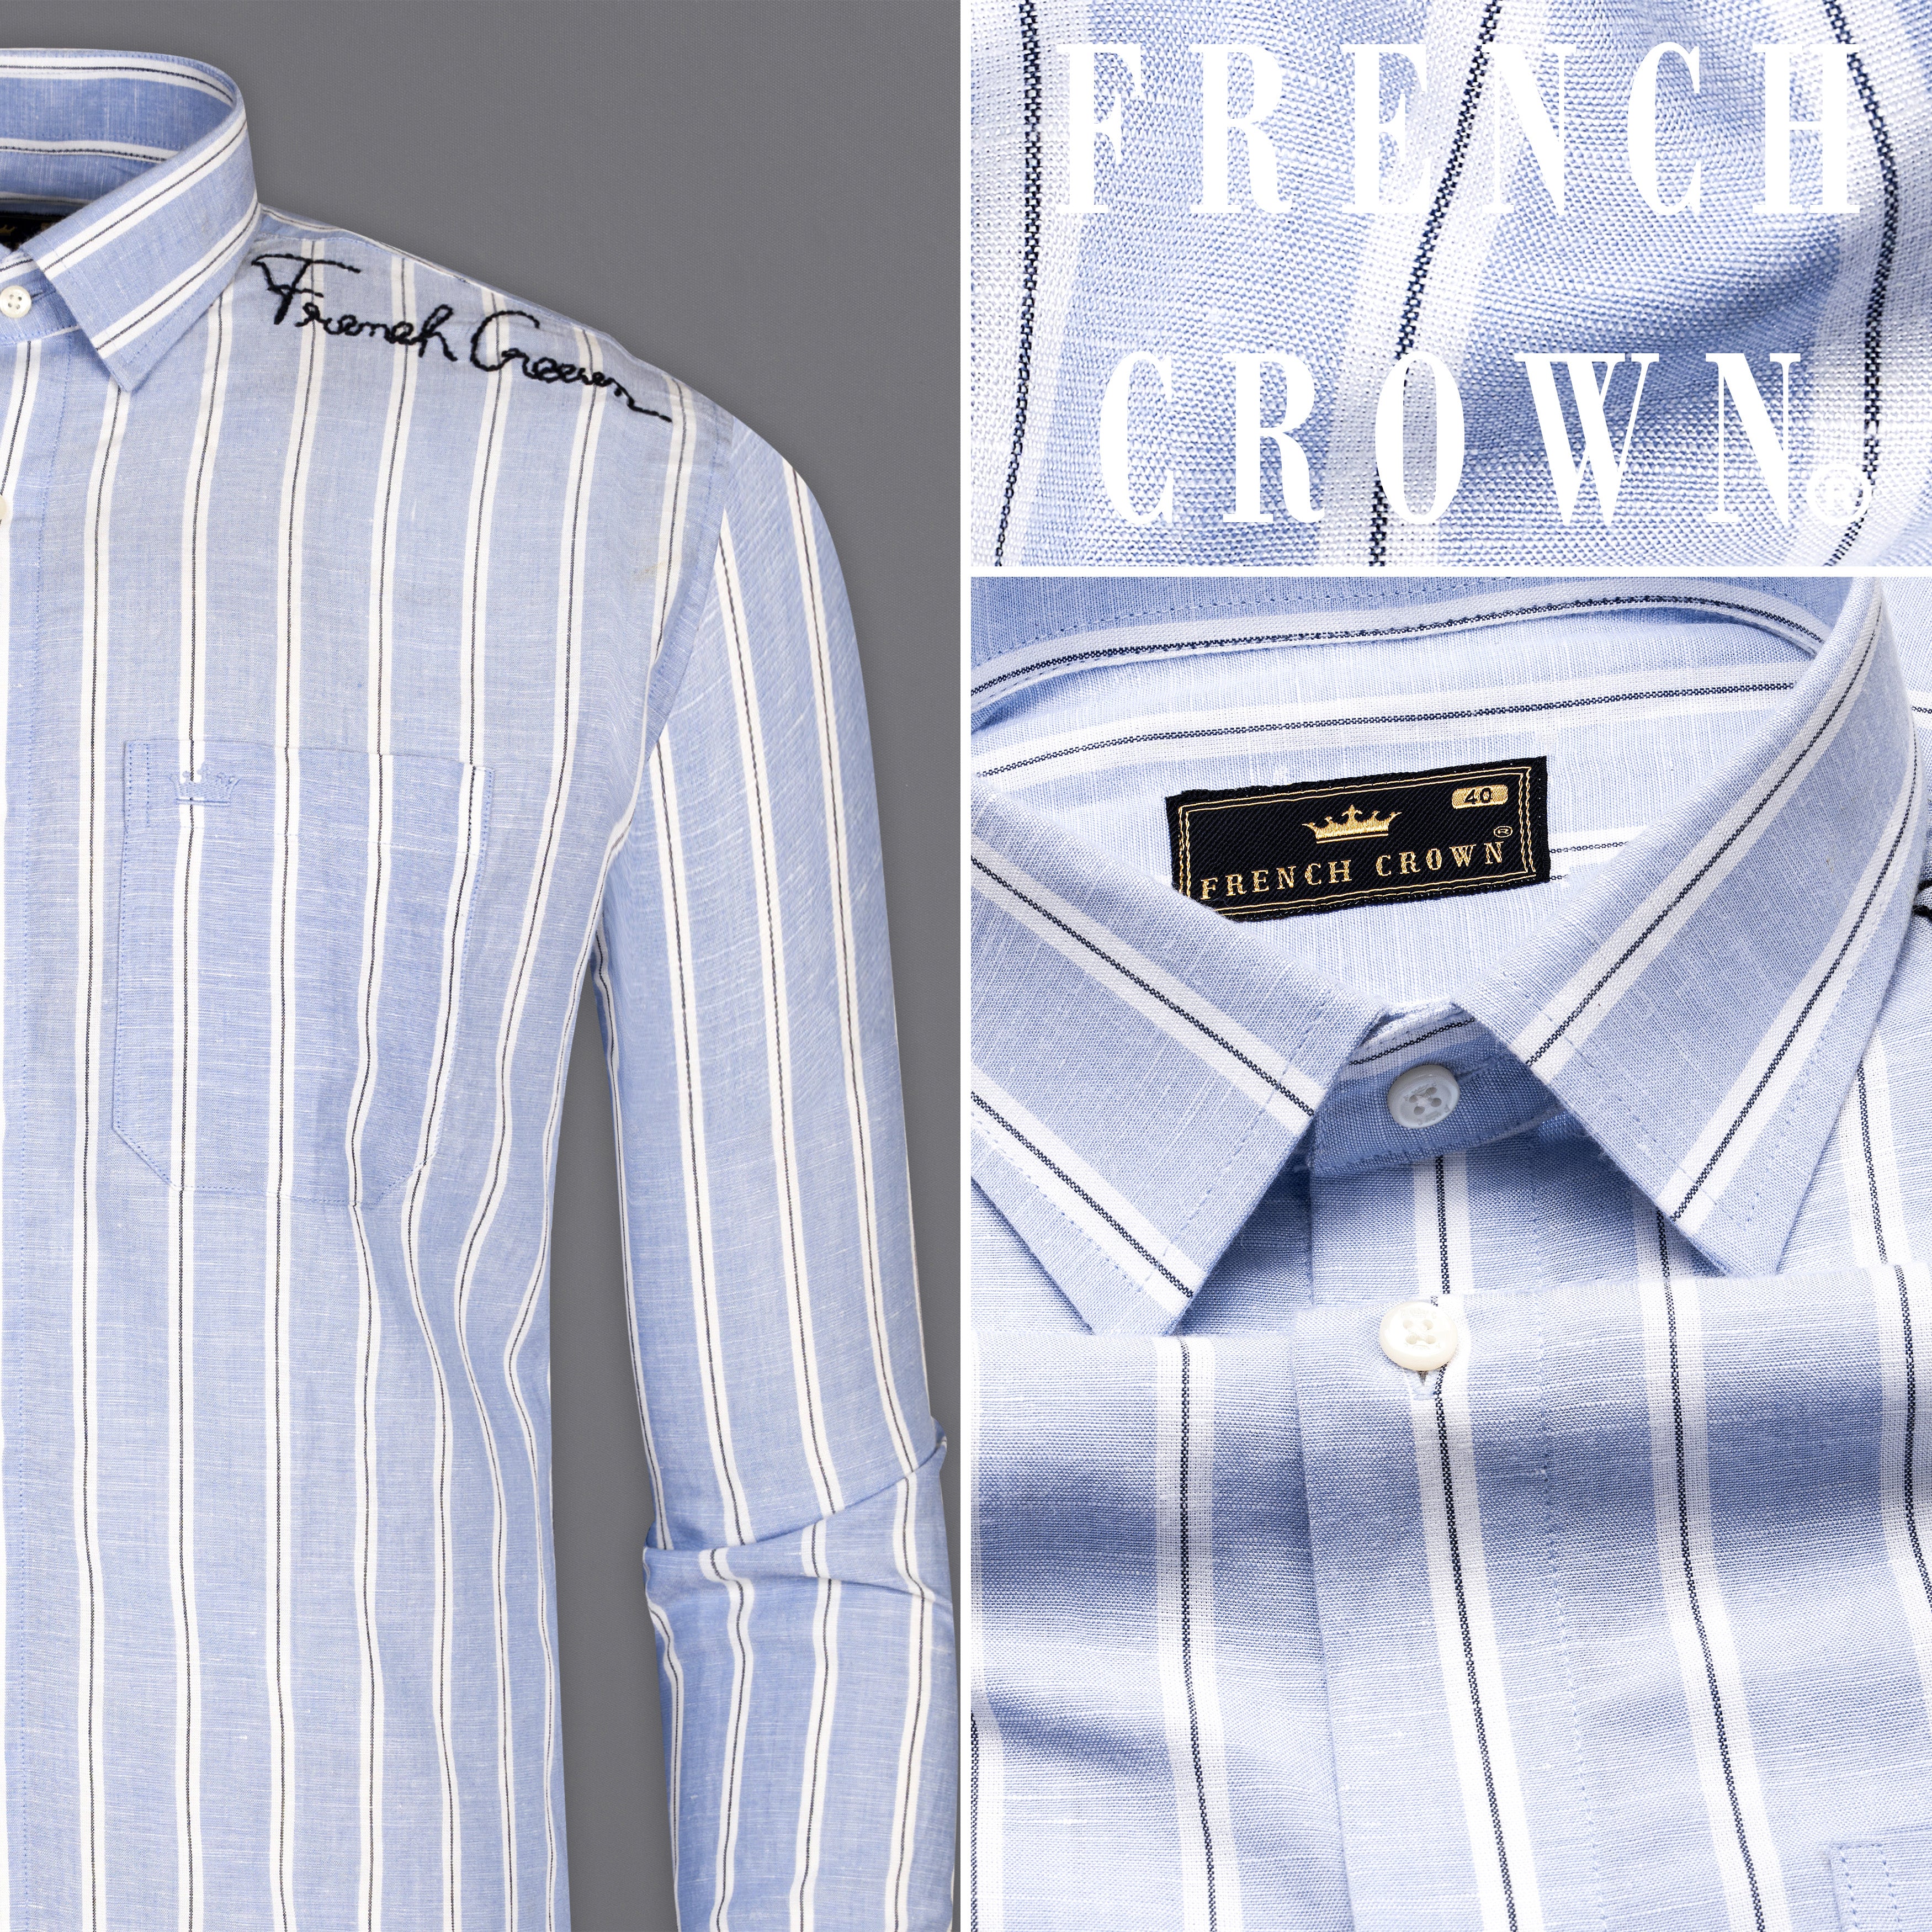 Periwinkle Blue and White Striped Luxurious Linen Hand Embroidered Signature Designer Shirt